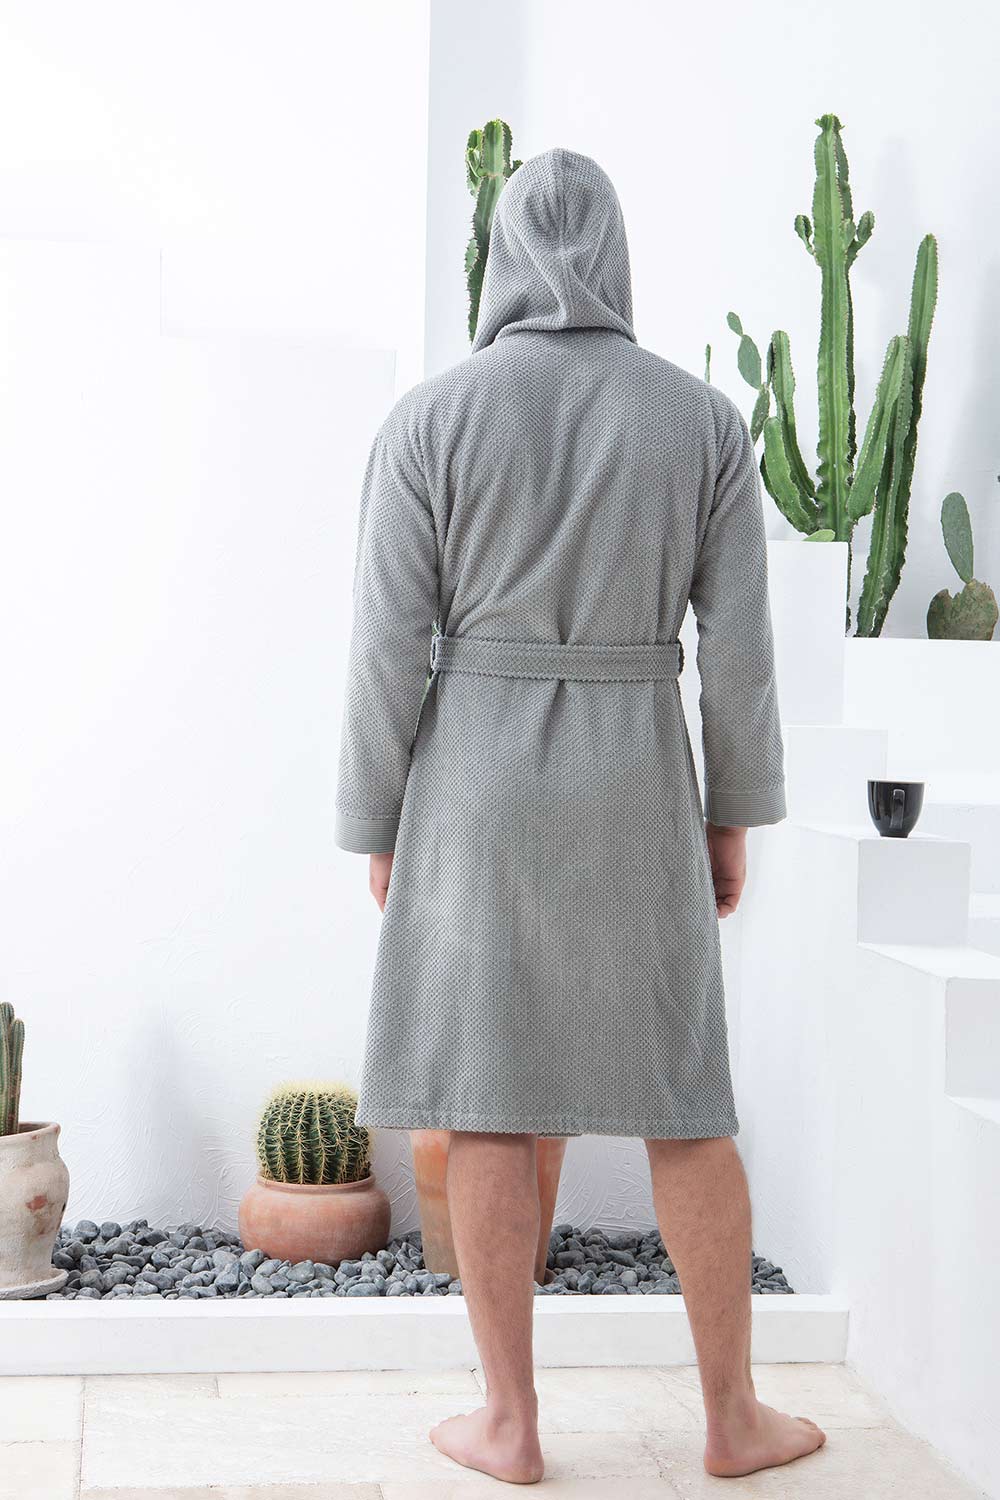 Men's Bathrobe, Ships to the US only, gifts for him